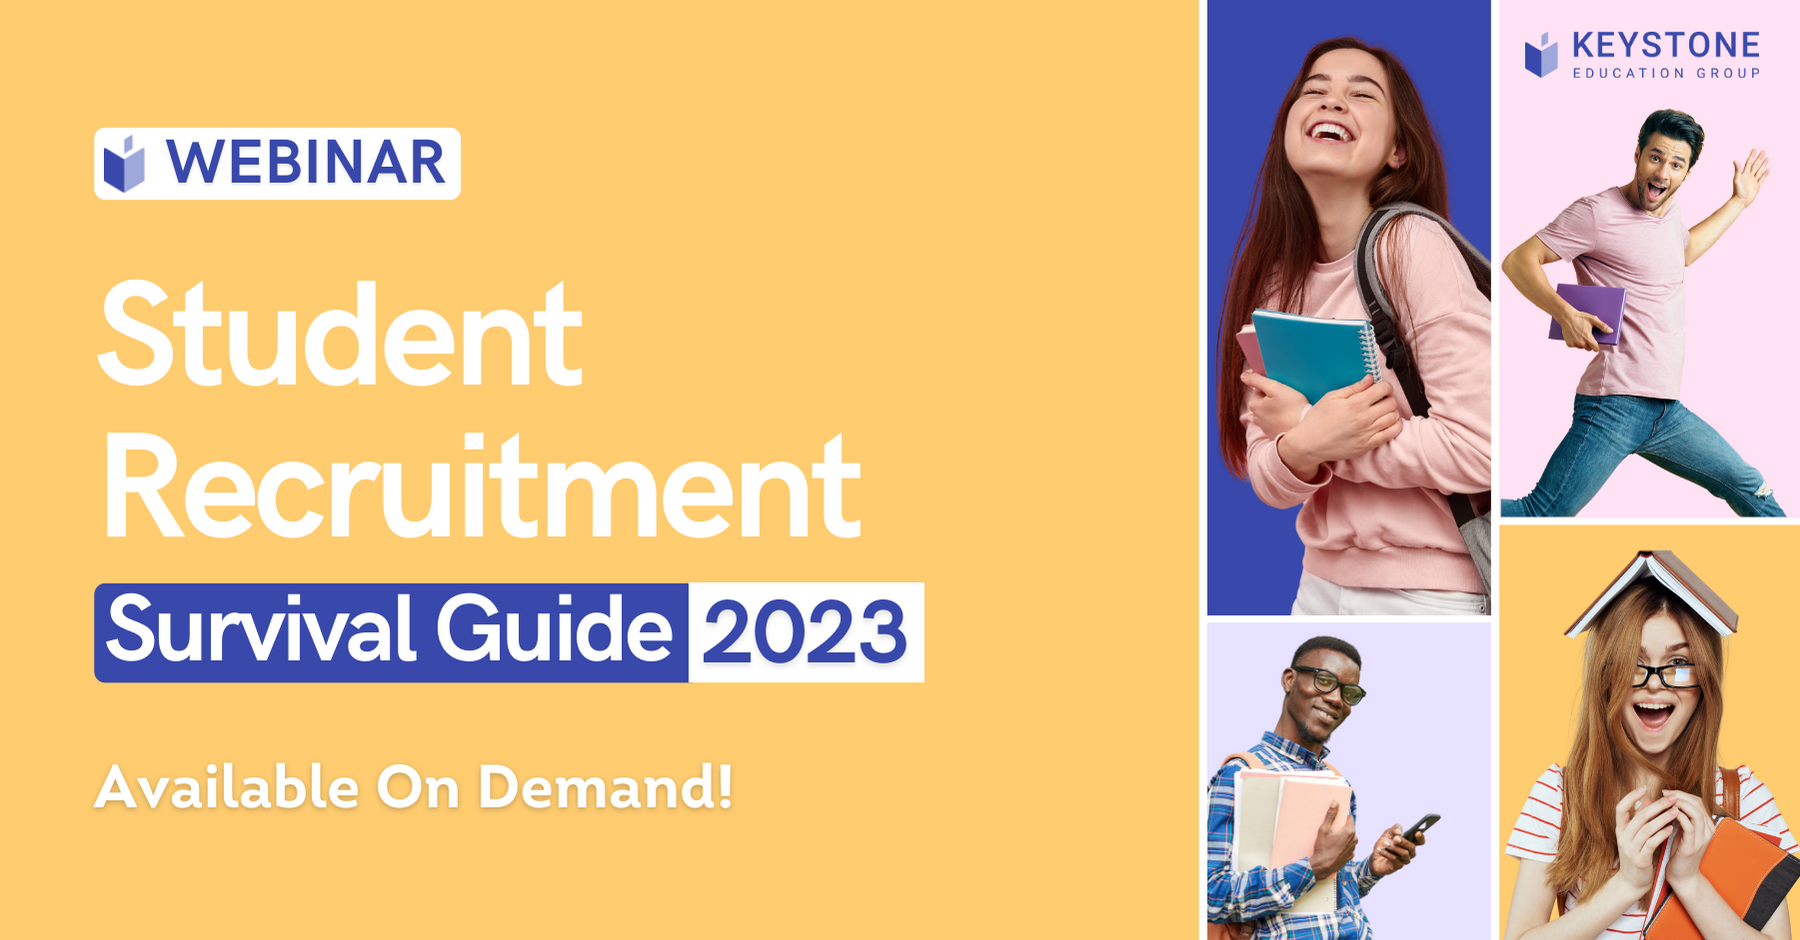 Student Recruitment Survival Guide 2023 On Demand